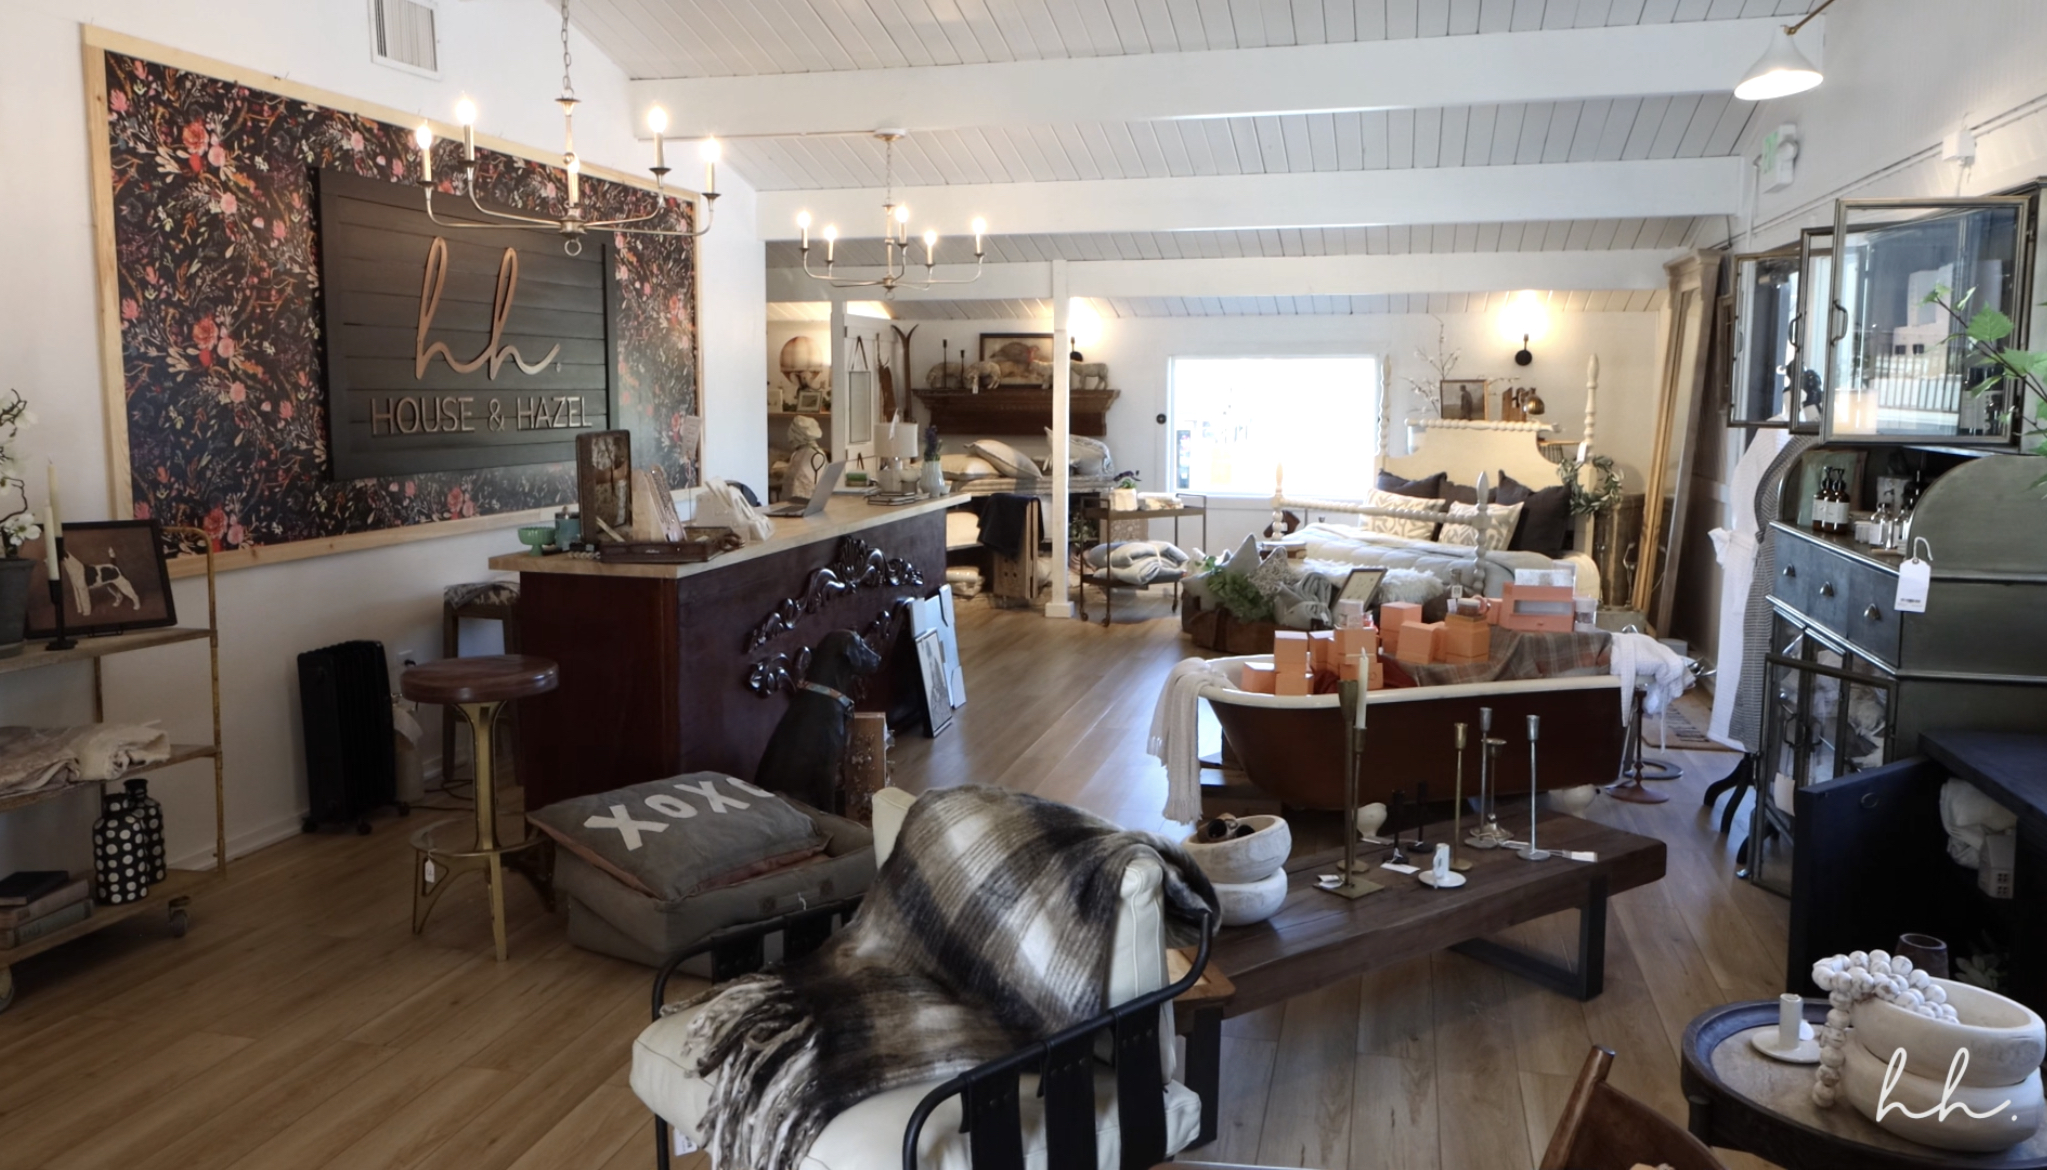 Furniture and home goods selection at House & Hazel.